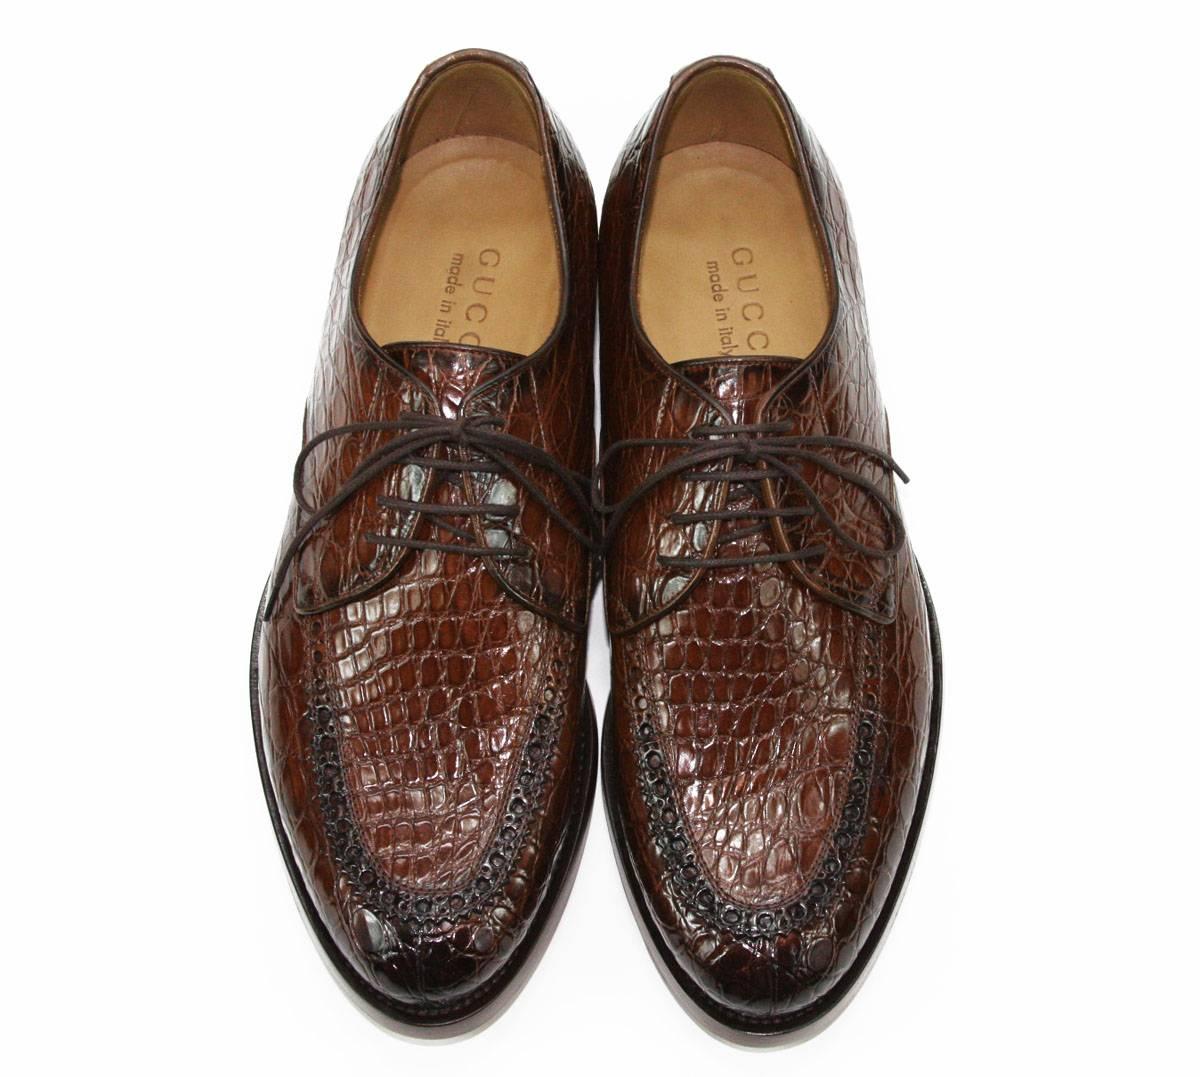 New GUCCI Millennium Men's CROCODILE Shoes
Gucci Size - 7
According To GUCCI Size Guide - US 7.5, Italian 41, UK 7
Shaded Brown CROCODILE
Lace-Up Oxford Style
Leather Sole
Made in Italy
Retail $4.000.00
New with Box.